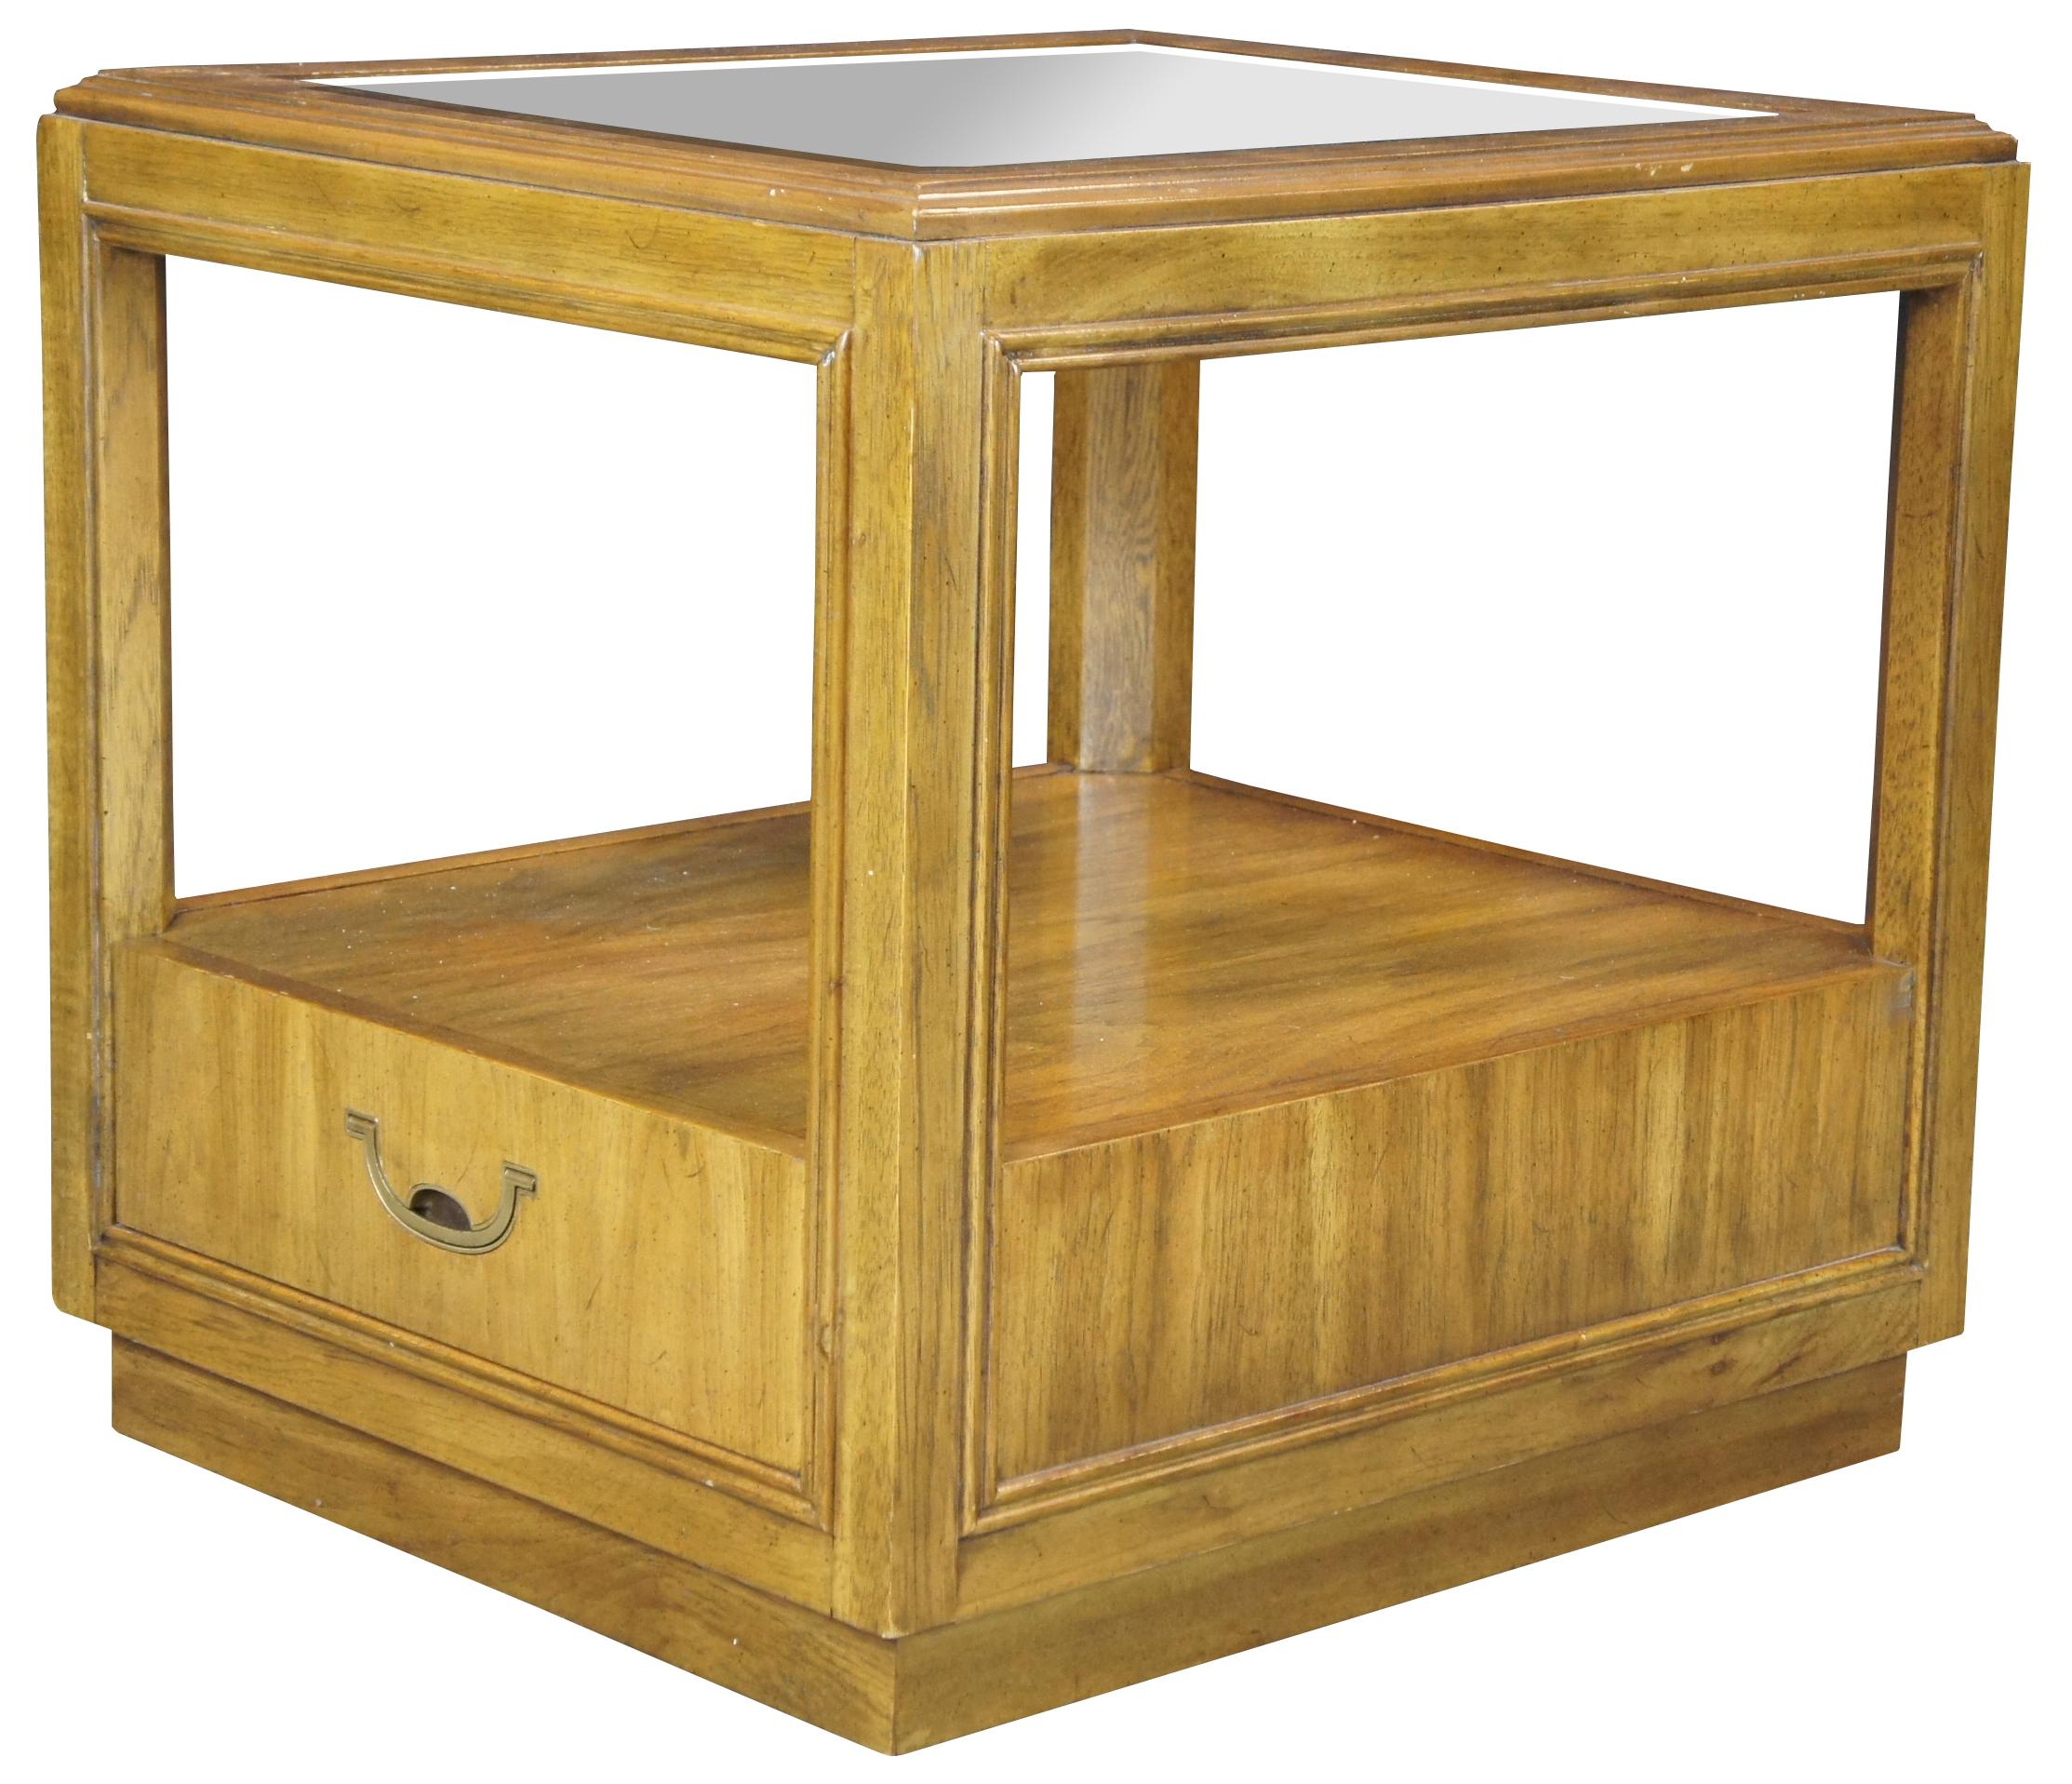 Vintage 1979 Drexel Heritage Accolade II side table. Made of walnut featuring cube shape with two tiers, glass top and storage drawer.
 